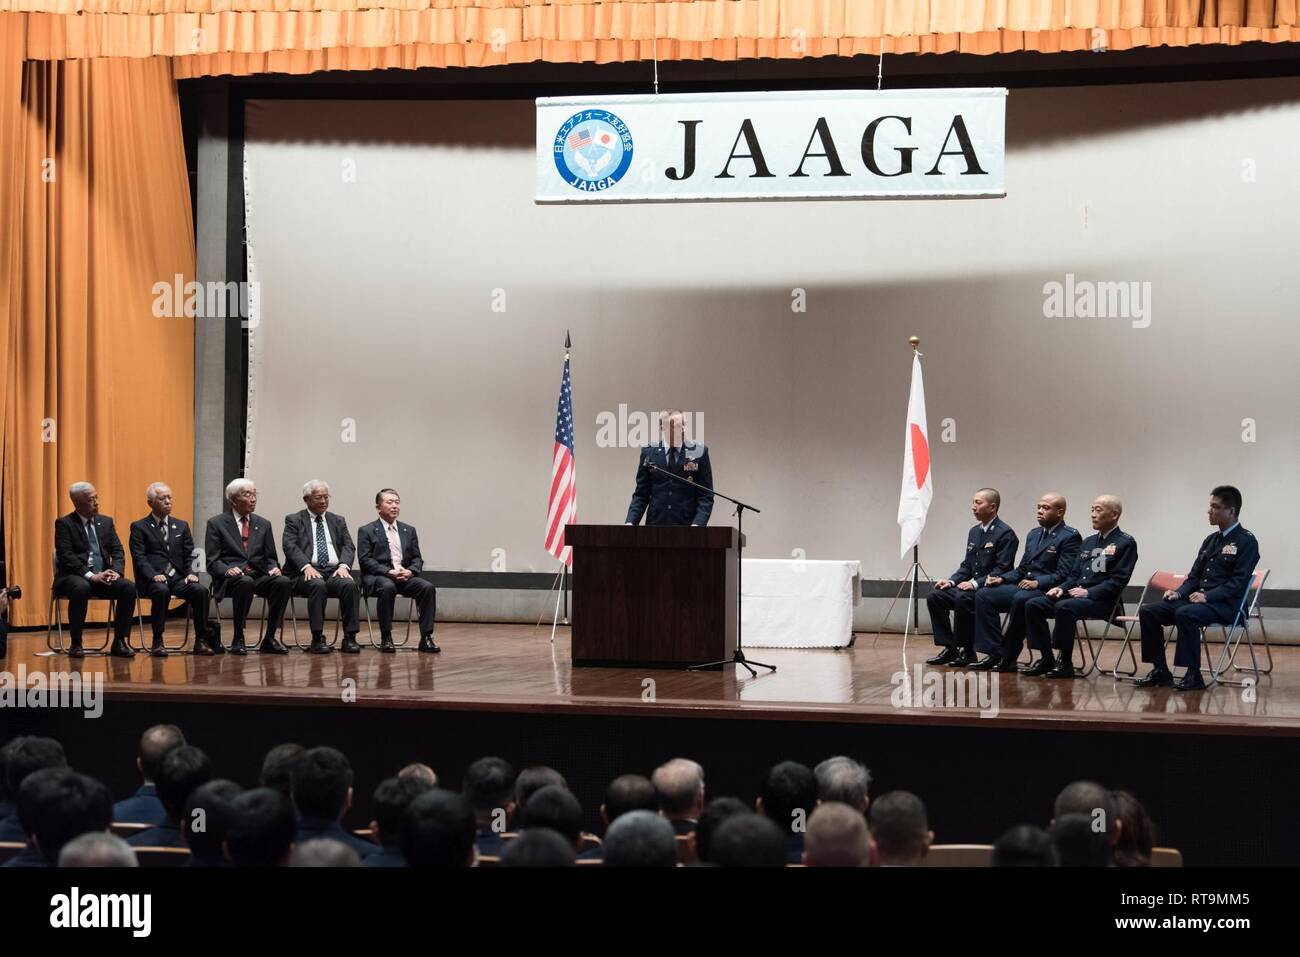 U.S. Air Force Brig. Gen. Case Cunningham, 18th Wing commander, recognizes the accomplishments of the Japan-America Air Force Goodwill Association awardees and the importance of partnership during a speech at the 2018 JAAGA Awards Ceremony January 31, 2019, at Naha Air Base, Japan. The Japan-U.S. alliance is the foundation not only for peace and security of Japan but also for those of the Asia-Pacific region. Japan-U.S. cooperation based on the alliance plays a significant role in working on the world’s security issues. Stock Photo